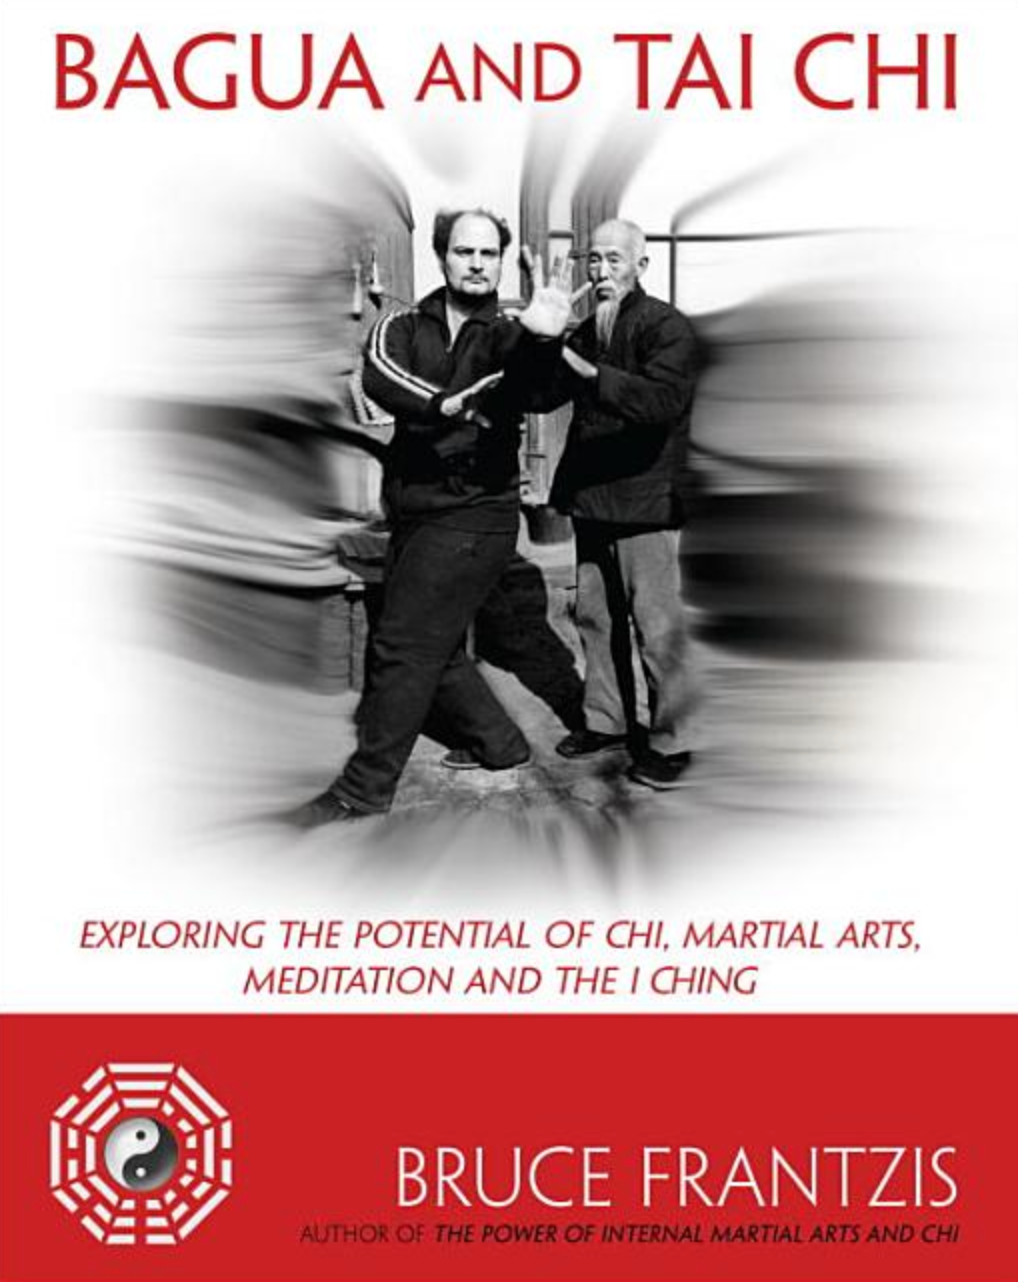 Bagua and Tai Chi: Exploring the Potential of Chi, Martial Arts, Meditation and the I Ching Book by Bruce Frantzis - Budovideos Inc